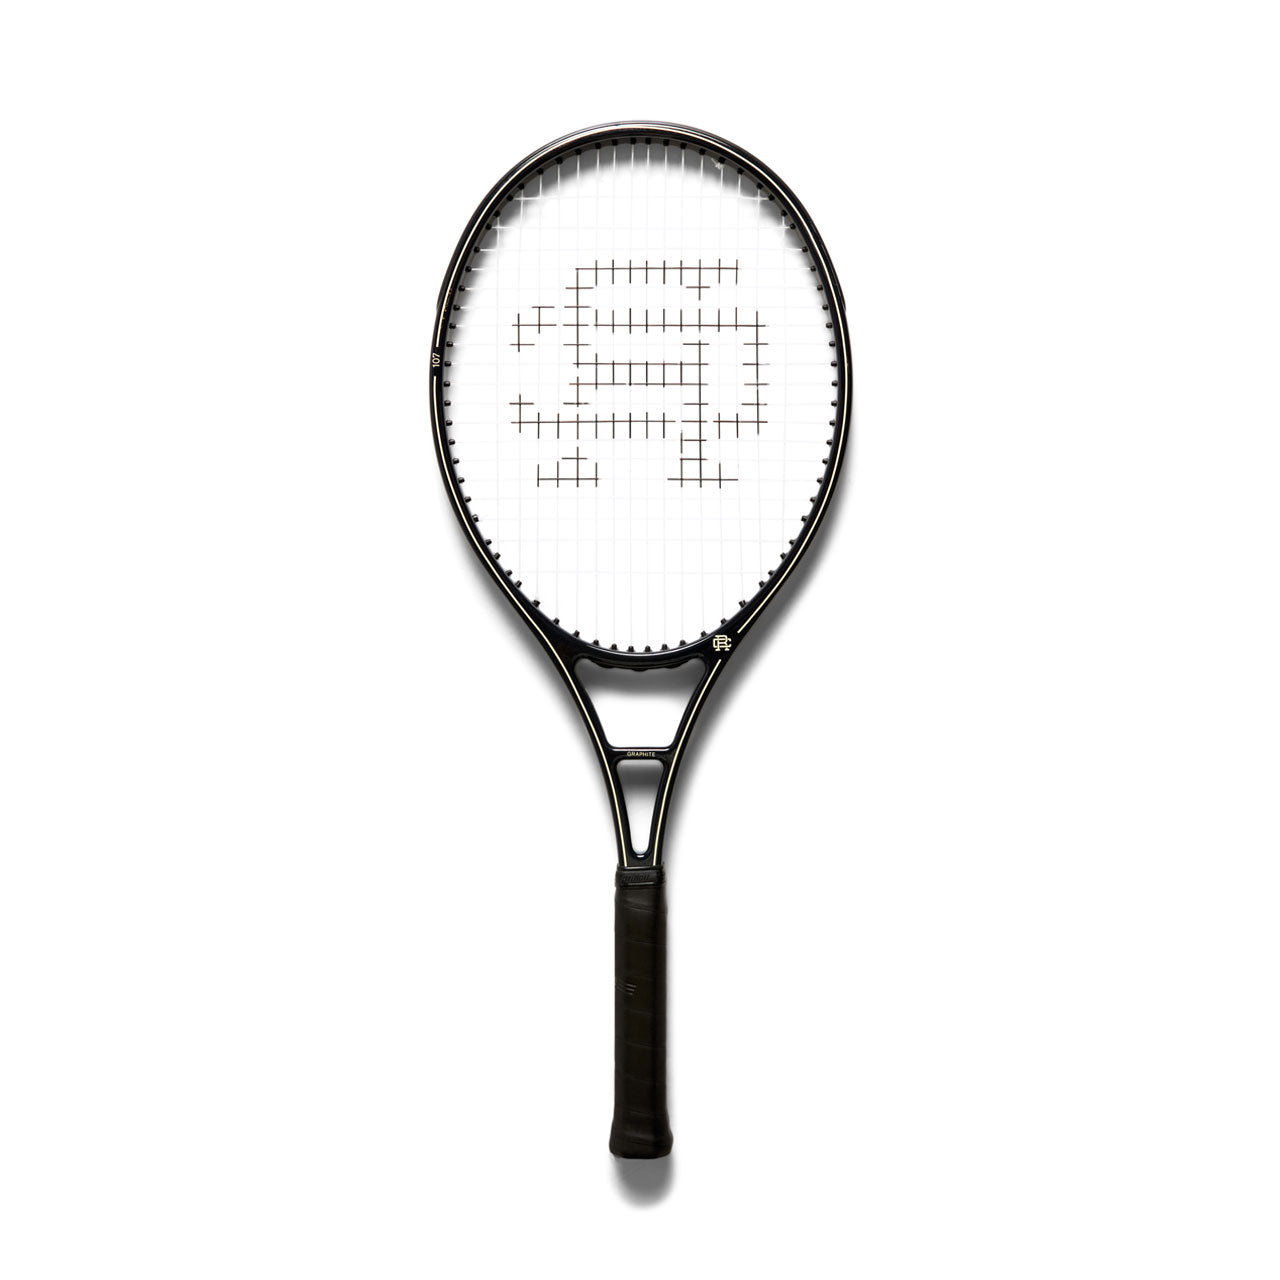 Reigning Champ x Prince Graphite Tennis Racket | Uncrate Supply